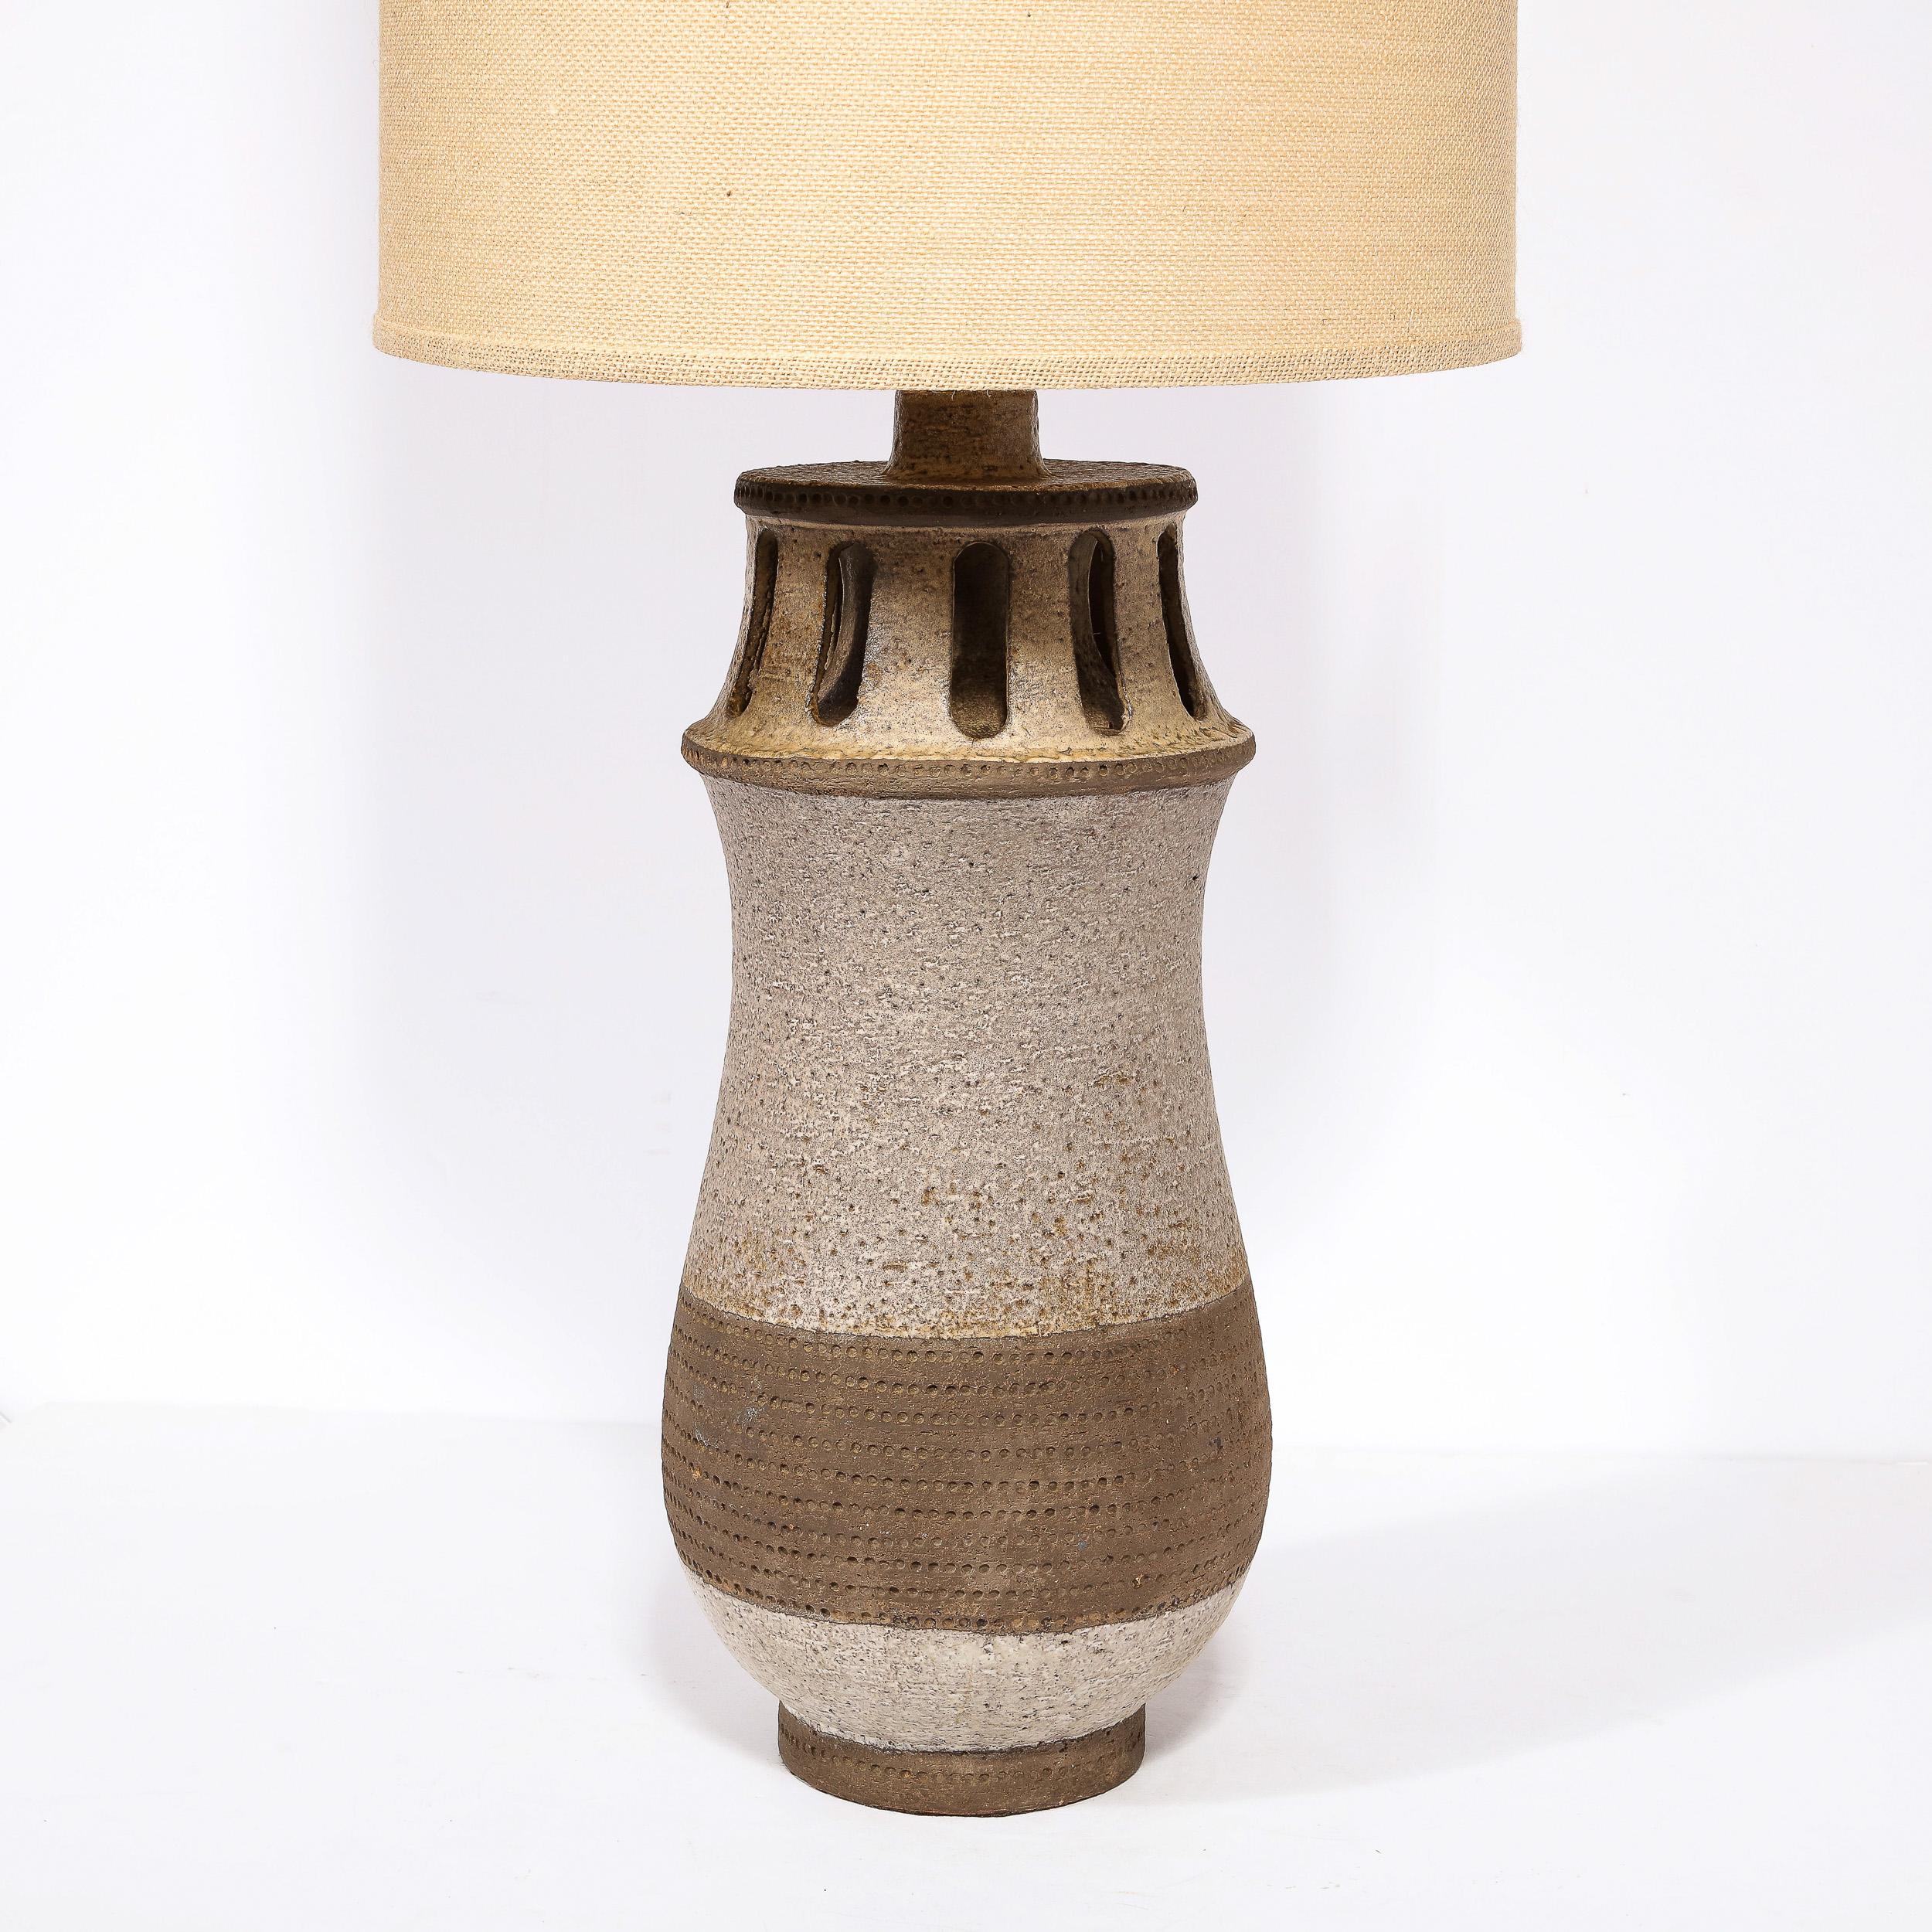 This stunning Mid-Century Modern ceramic lamp was hand crafted in the United States circa 1960. It features an undulating cylindrical body sitting on a circular cafe au lait base. The curved body has been executed in a dark ecru hued textured